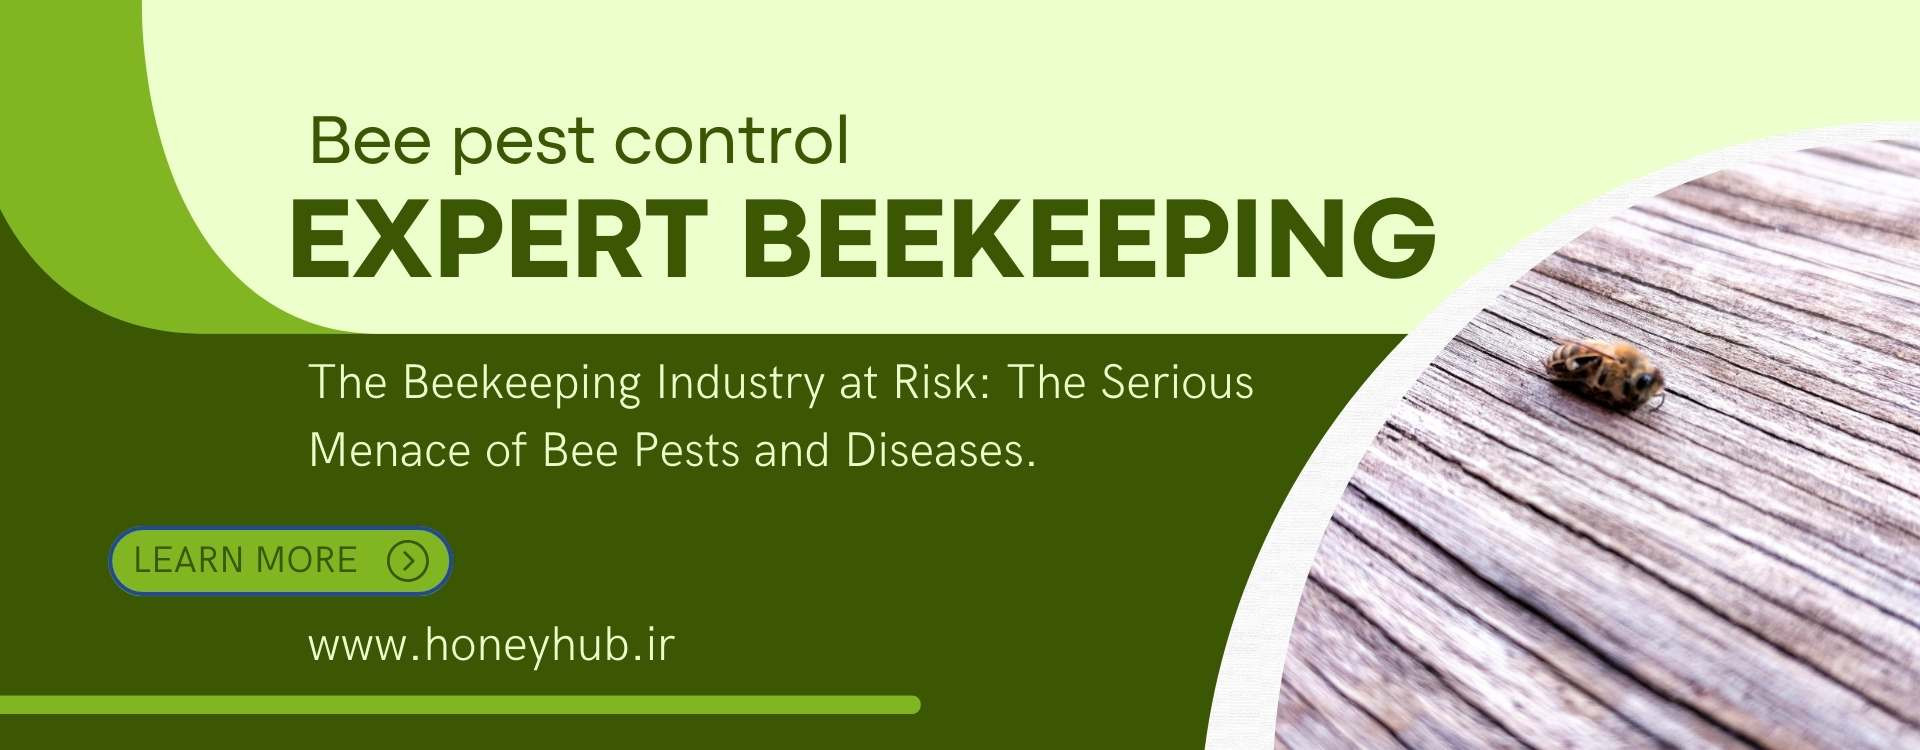 A Serious Threat to the Beekeeping Industry